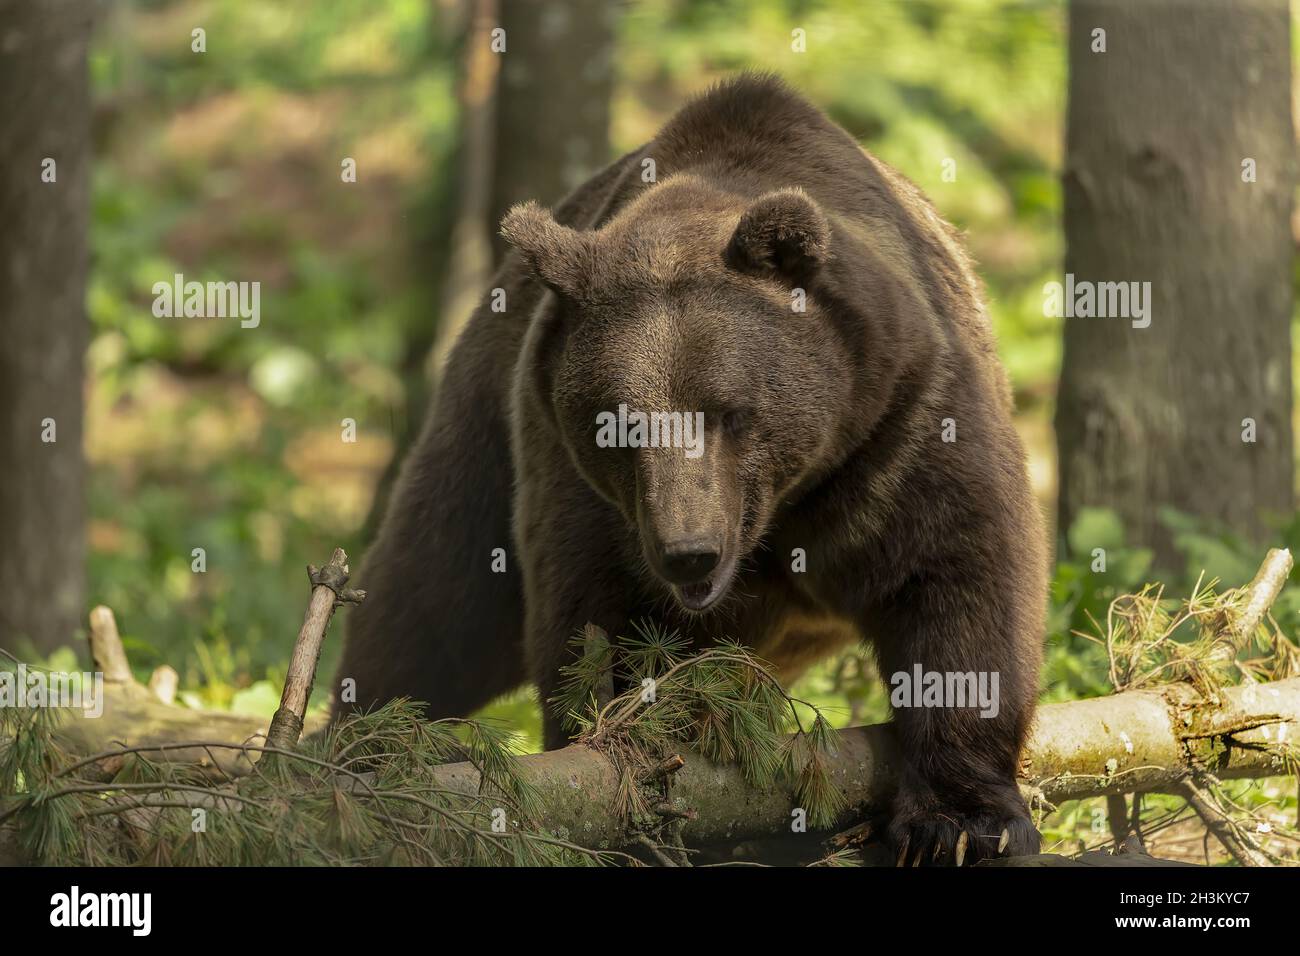 The brown bear (Ursus arctos) in its natural environment natural scene from forest habitat Stock Photo